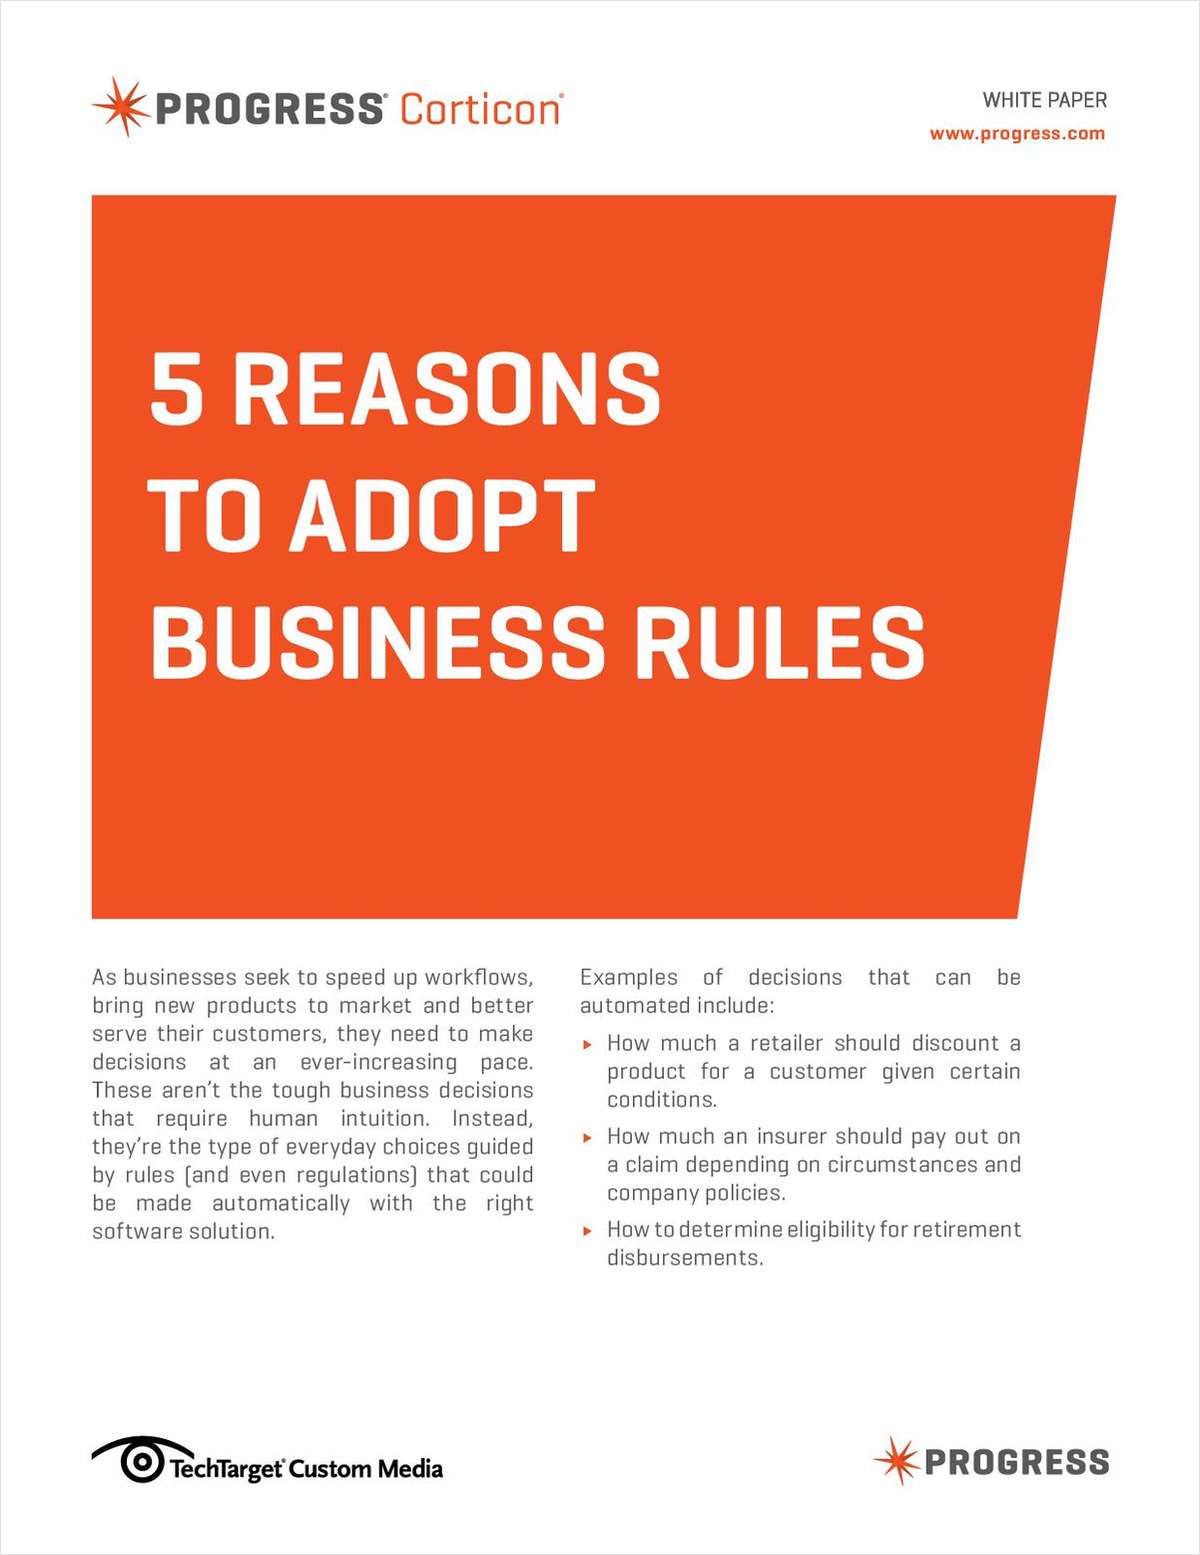 5 Reasons to Adopt Business Rules